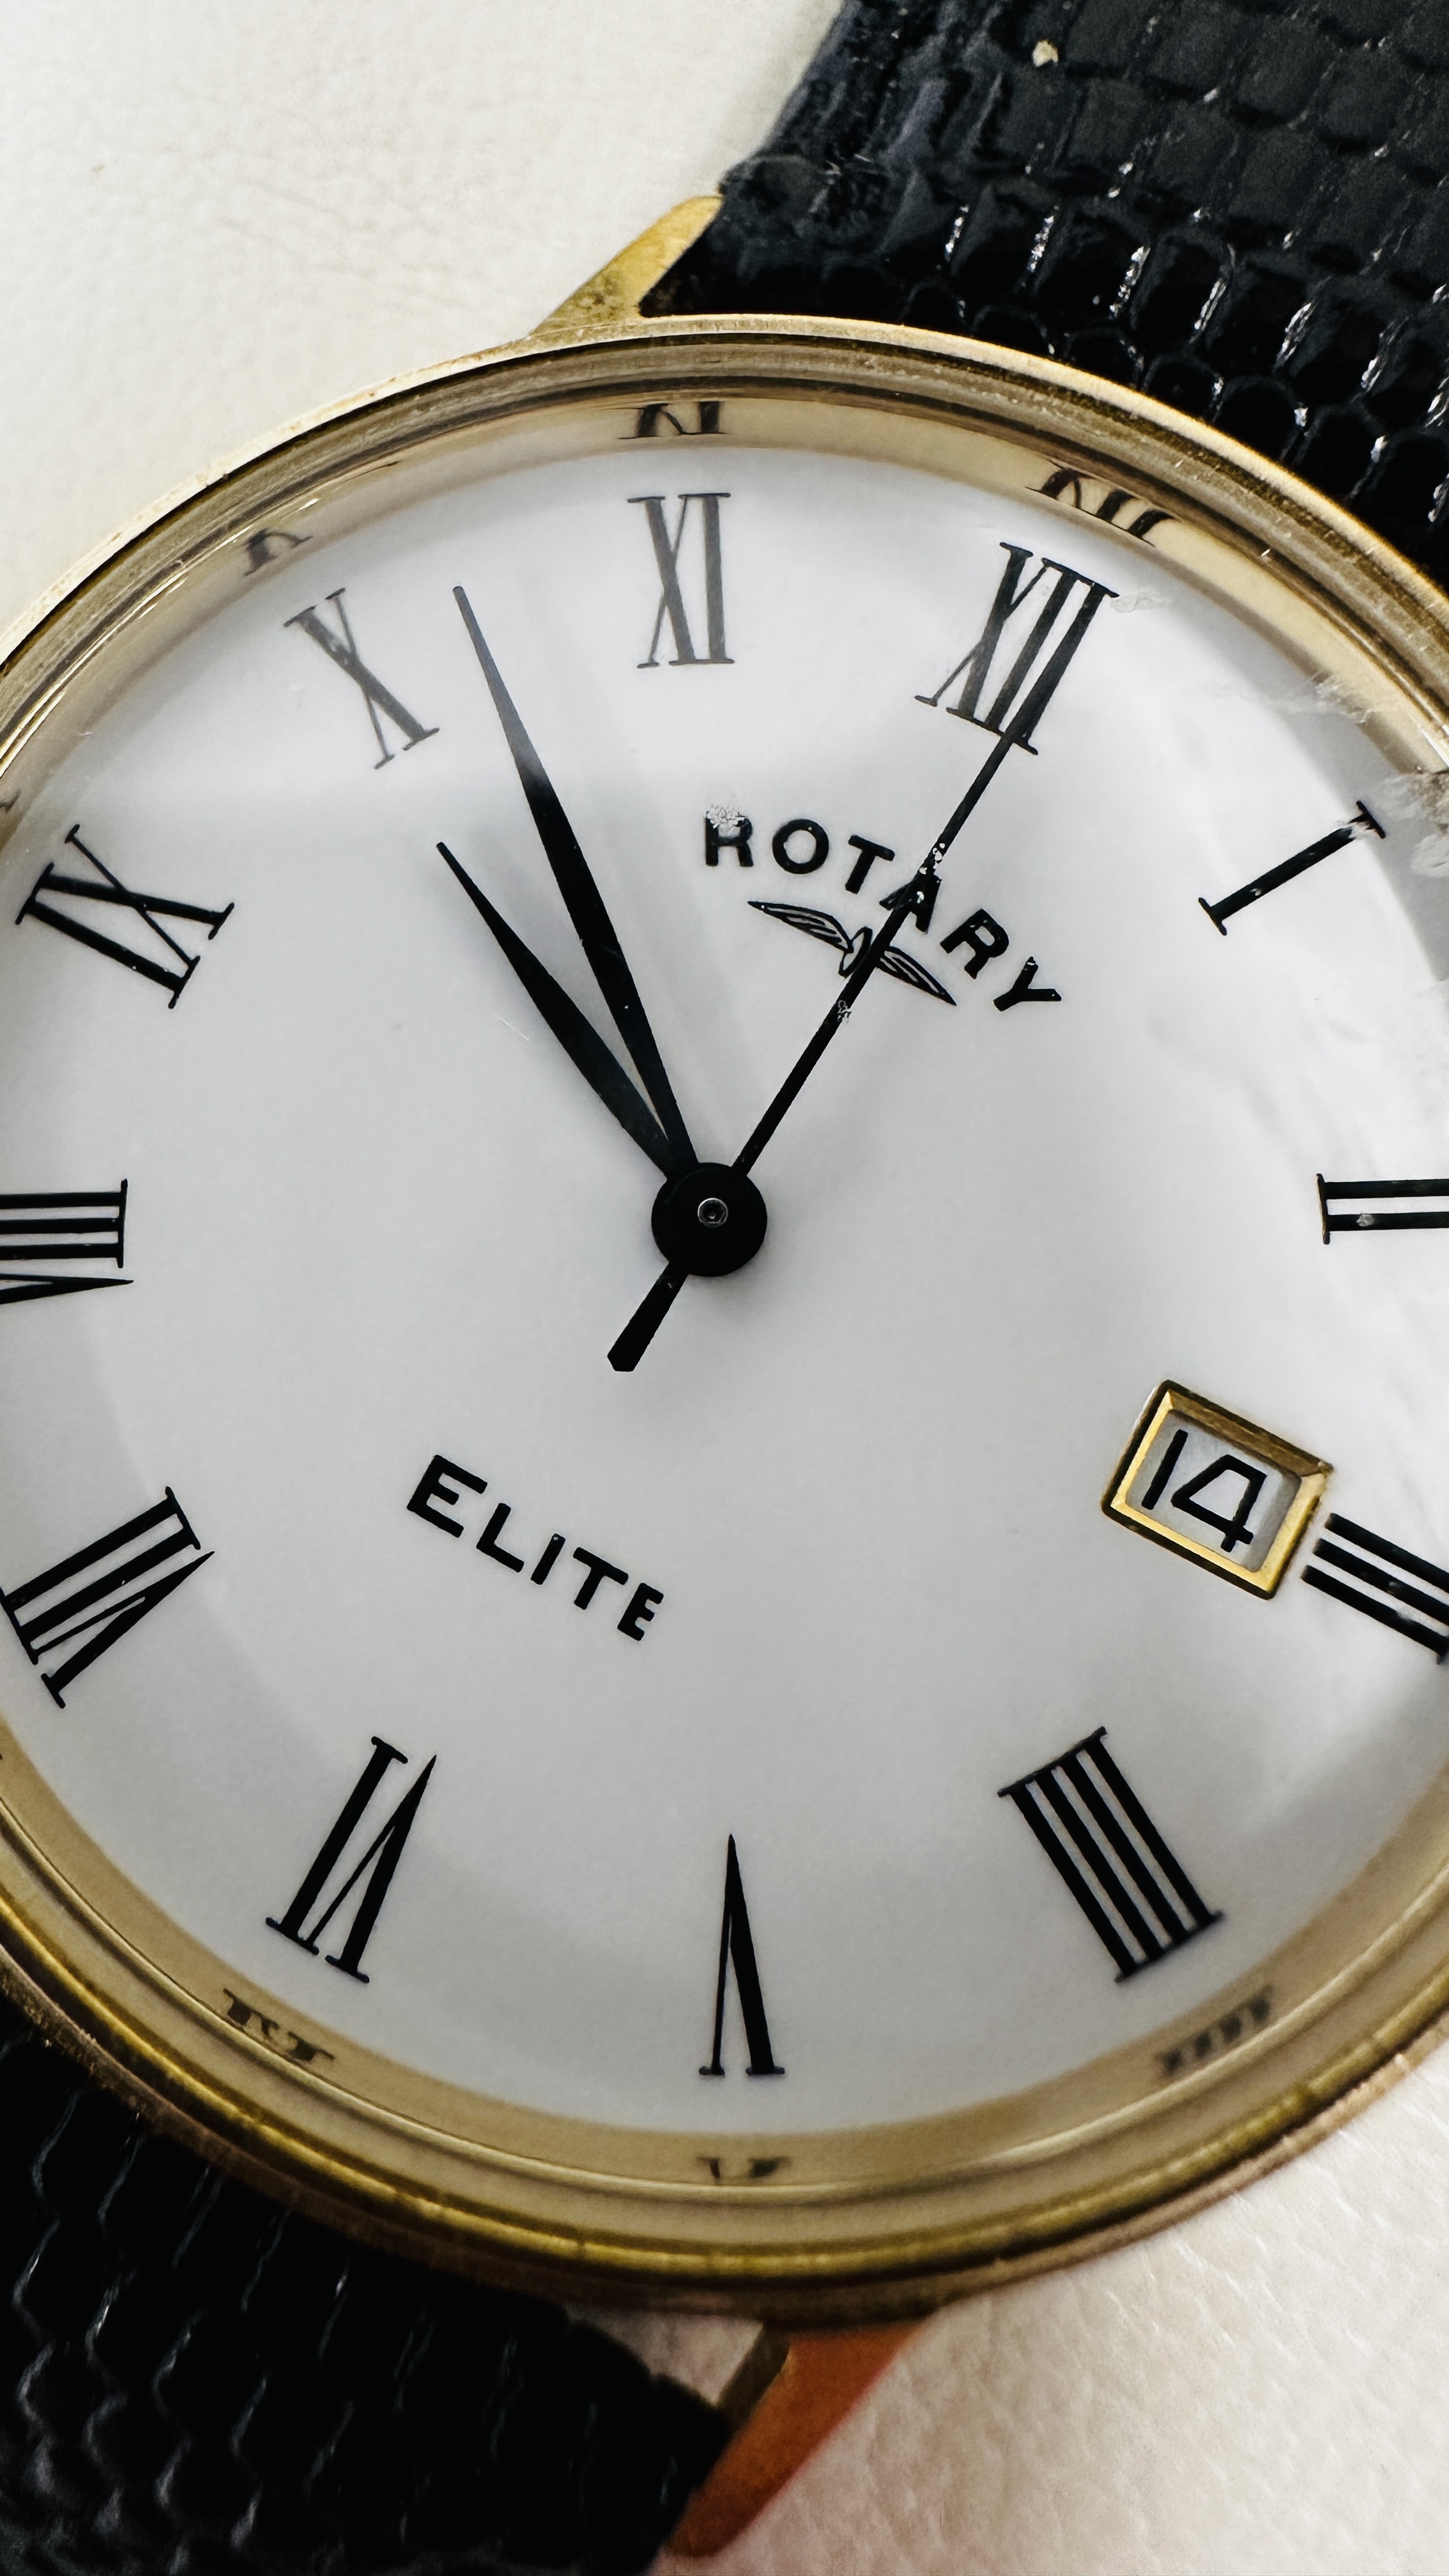 A GENT'S ROTARY ELITE 9CT GOLD CASED WRIST WATCH ON A BLACK LEATHER STRAP (BOXED). - Image 3 of 7